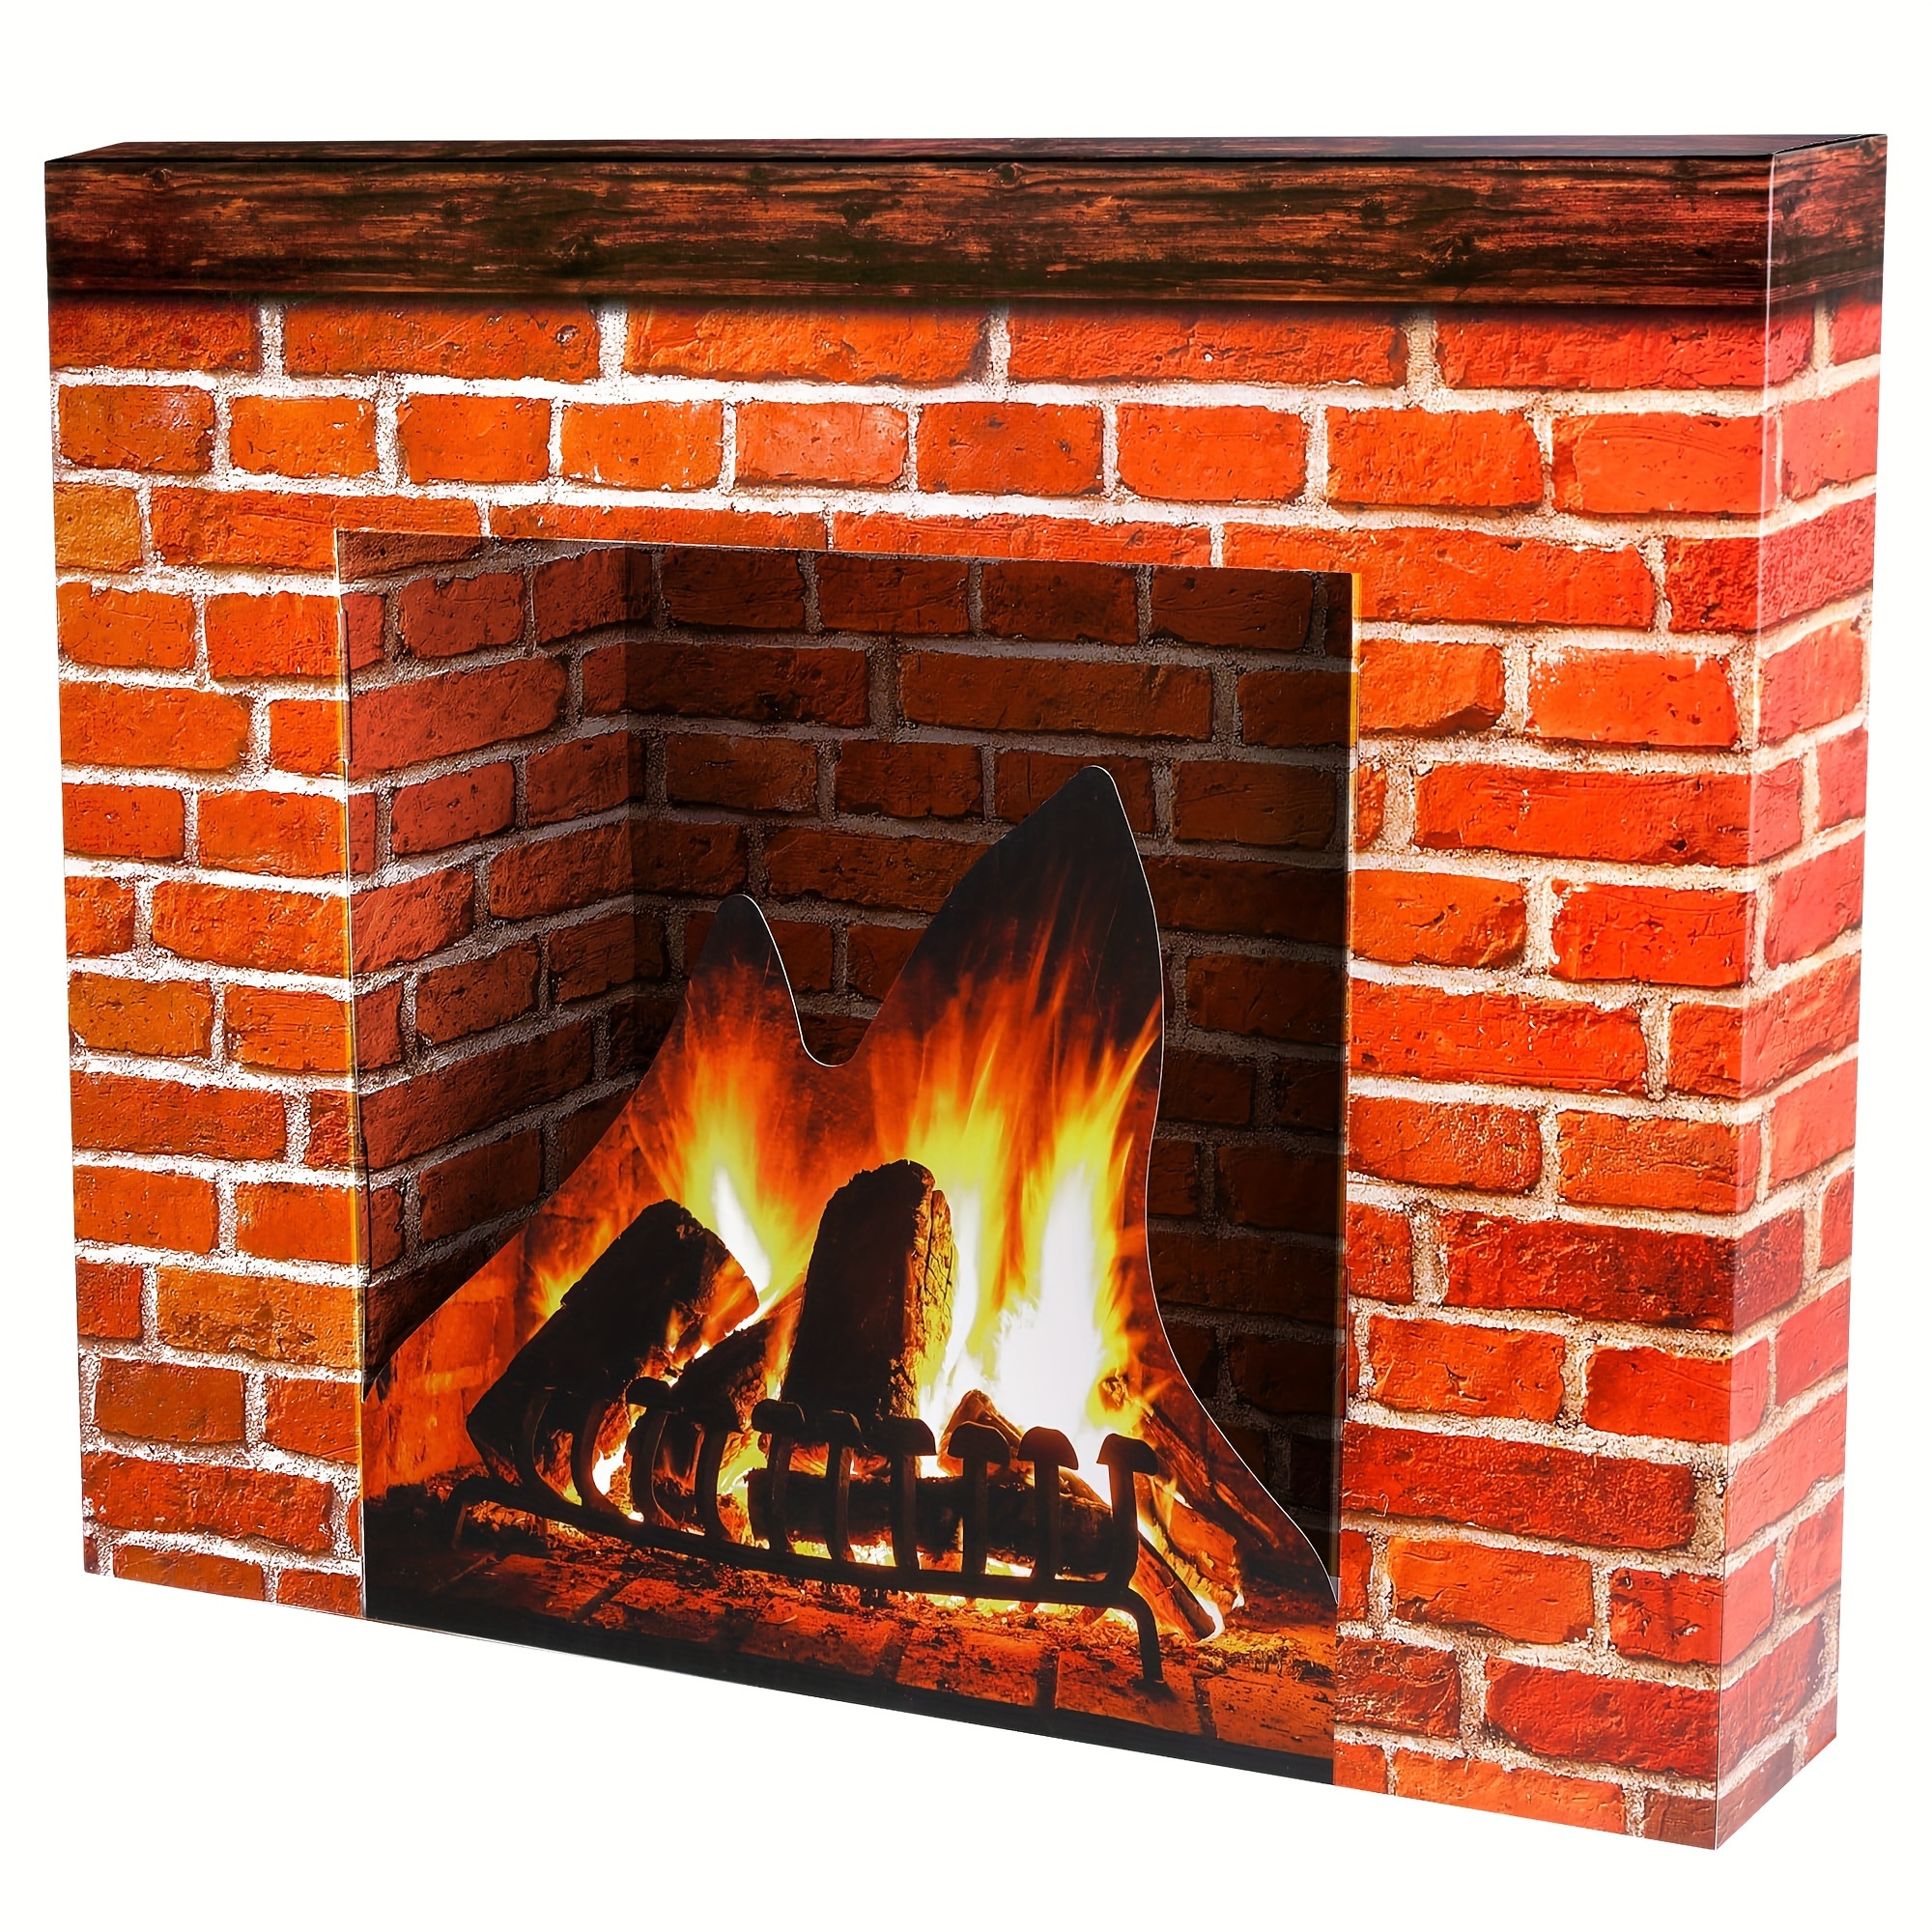 

Christmas Cardboard Fireplace Prop- 3d Artificial Red Brick Cardboard Fireplace- Brick Fireplace Stand-up- Fake Fireplace Backdrop For Christmas Decoration